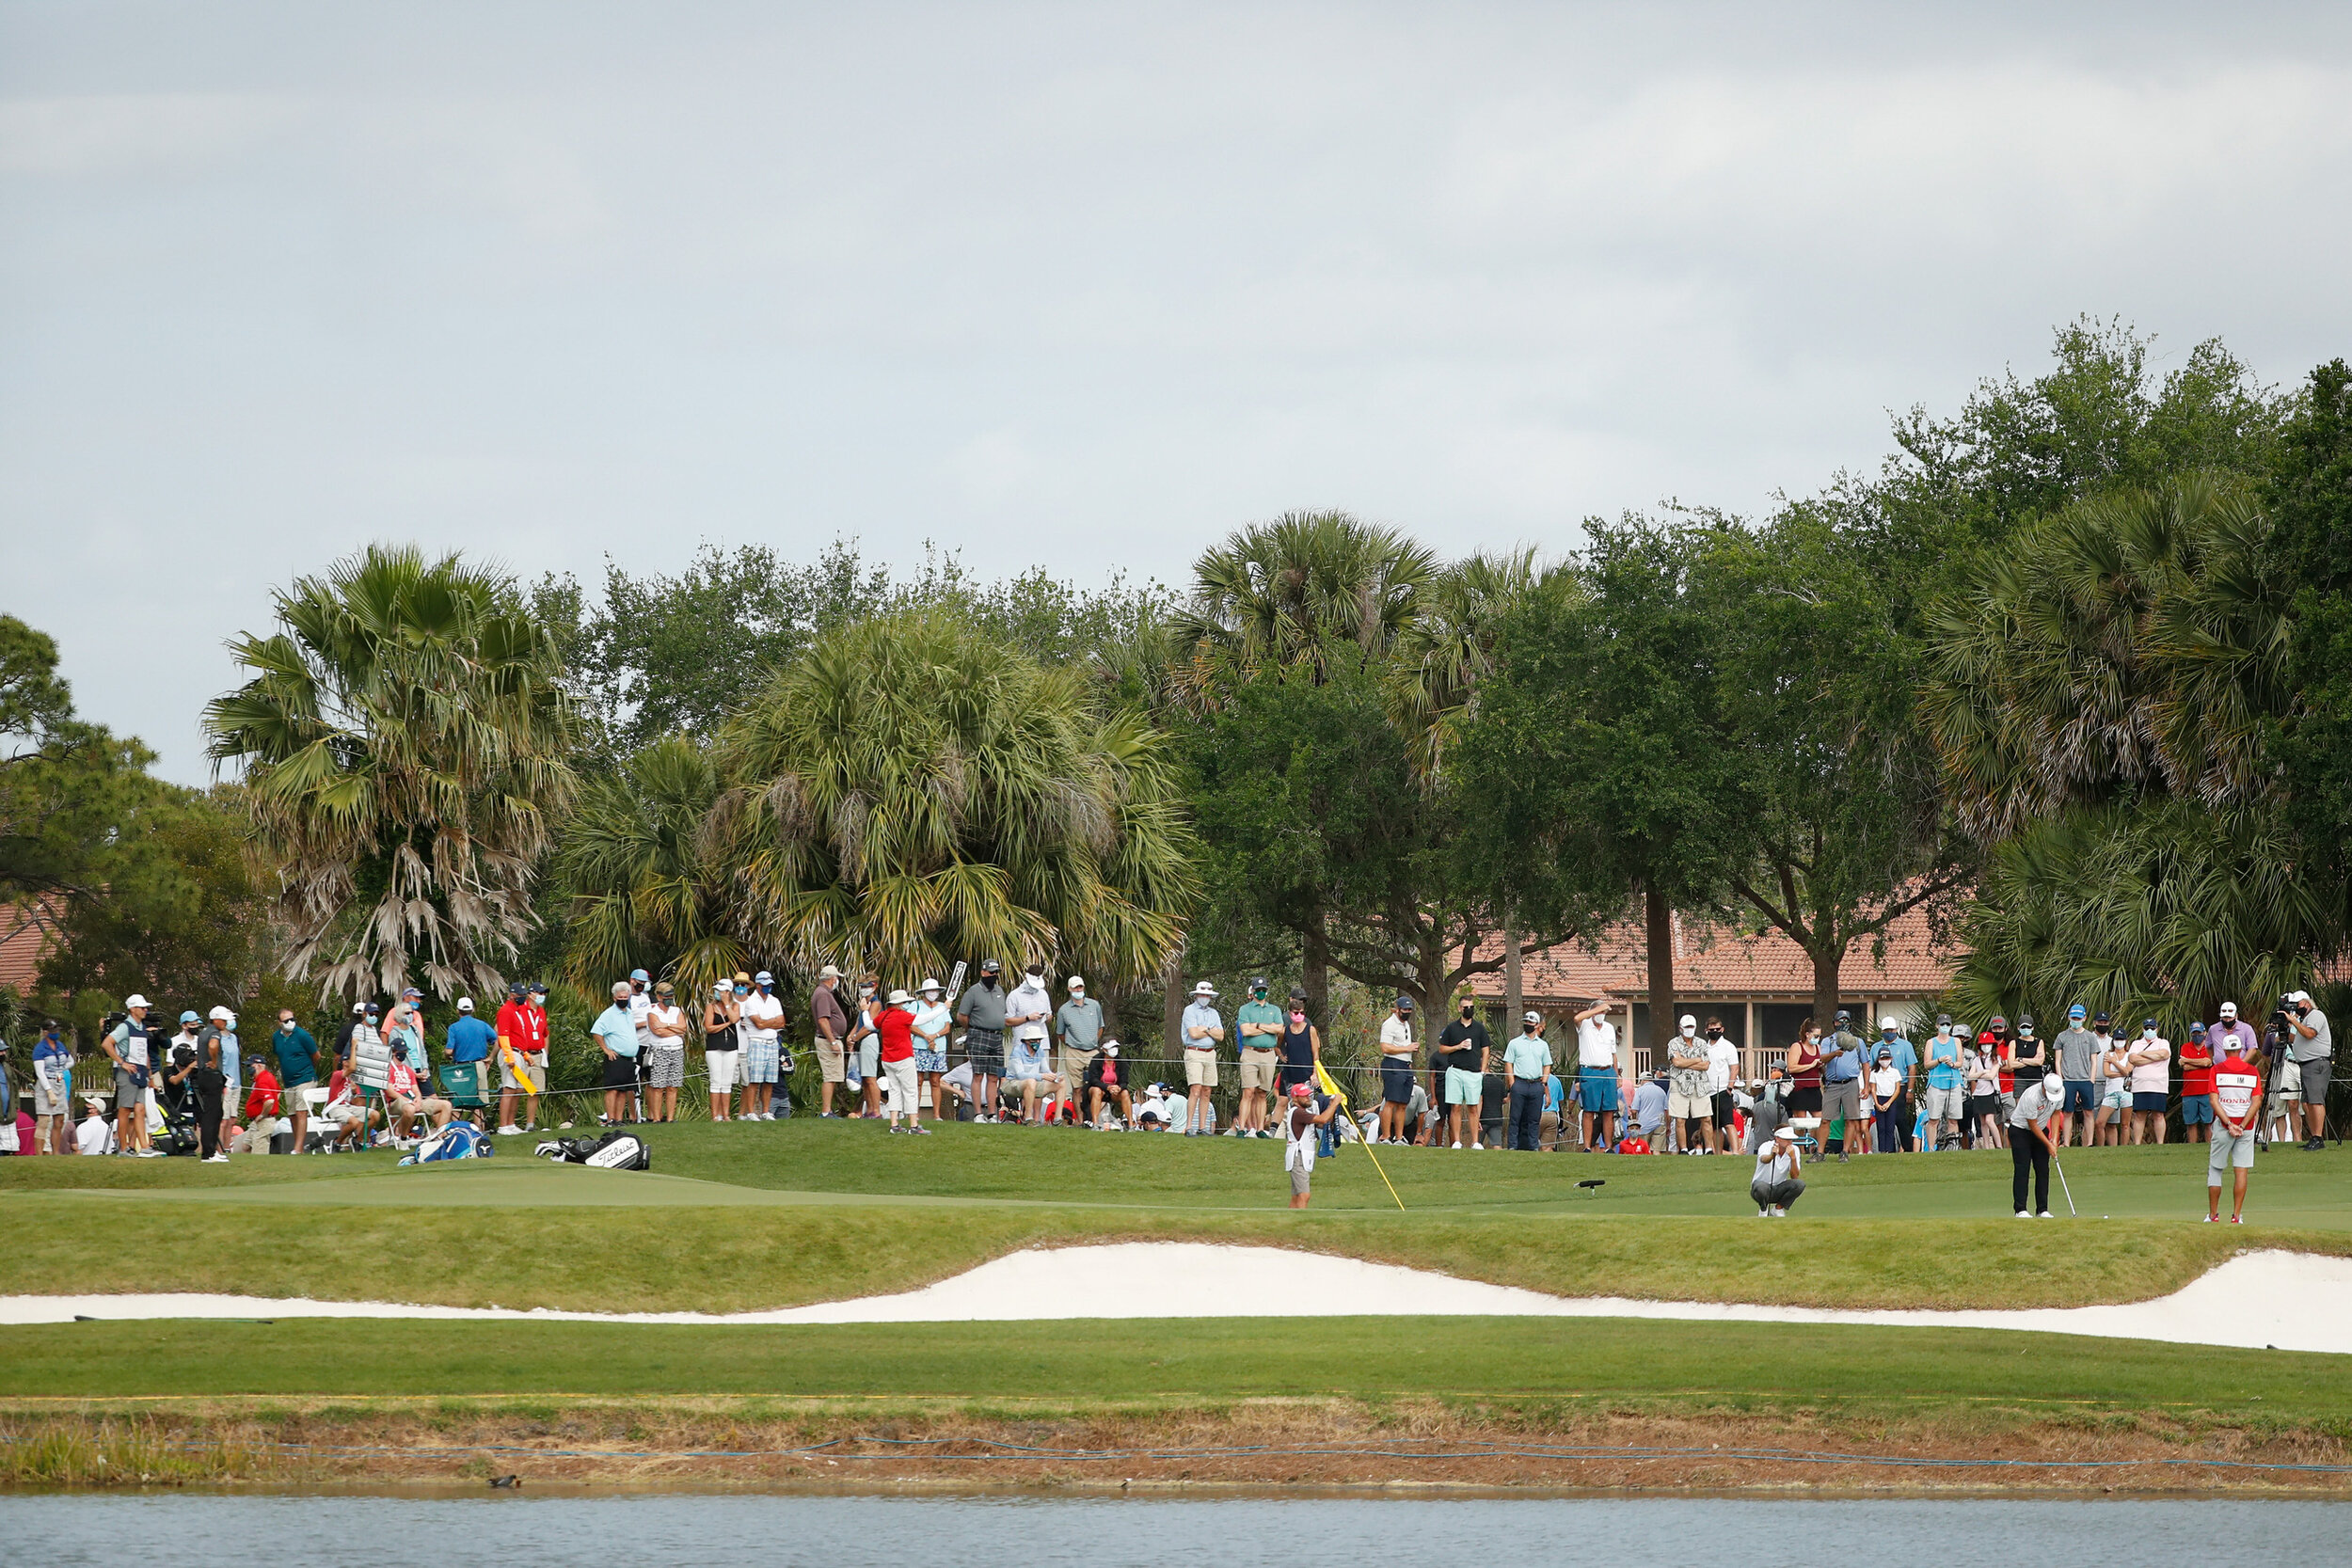  PALM BEACH GARDENS, FLORIDA - MARCH 19: A general view of the first green as fans follow the group of Rickie Fowler of the United States, Sungjae Im of South Korea and Keith Mitchell of the United States during the second round of The Honda Classic 